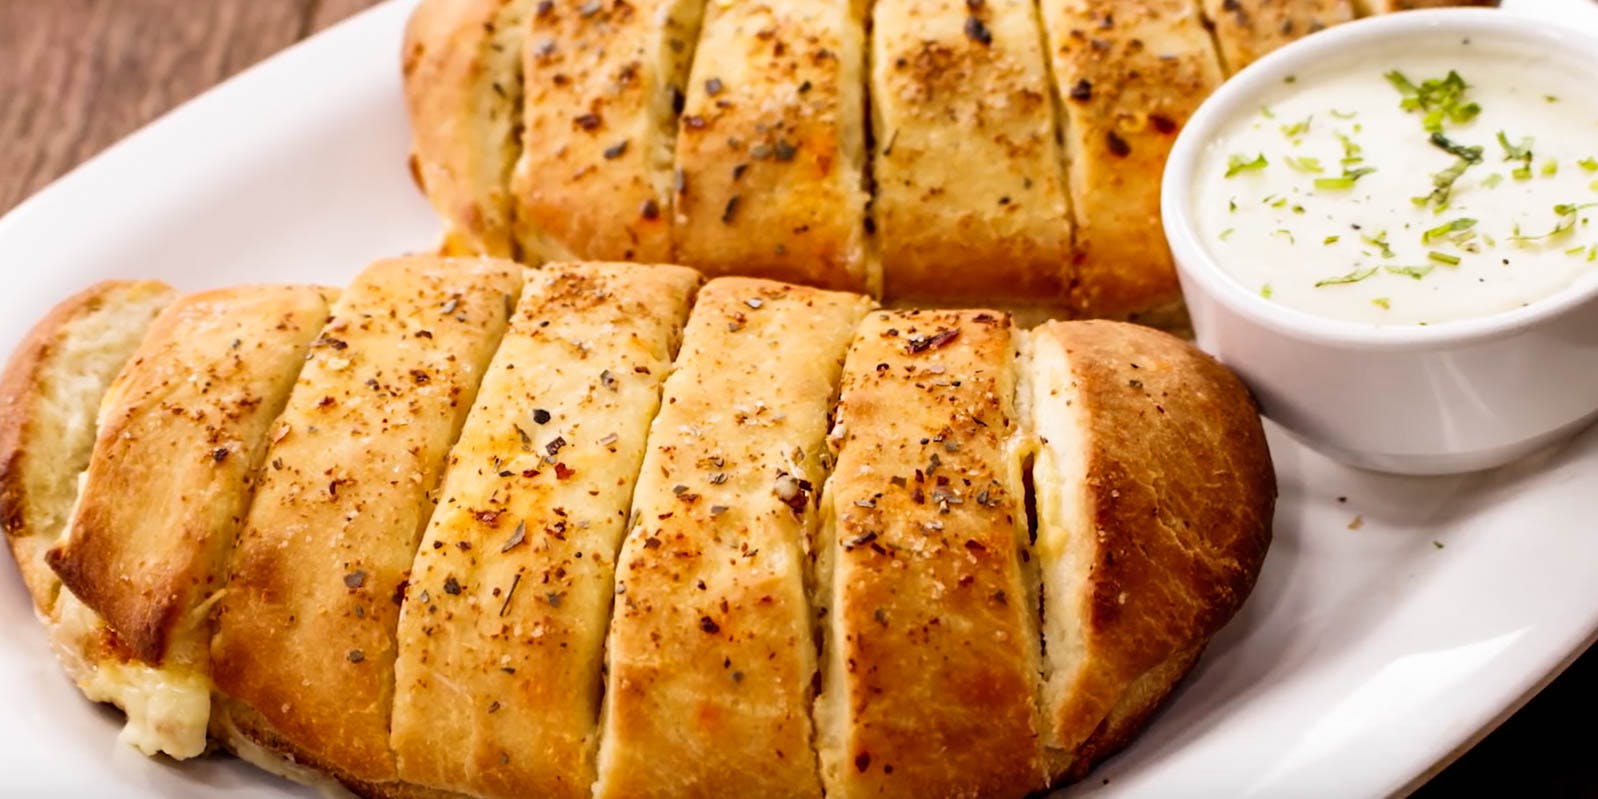 How to Make Cannabis-Infused Cheese Stuffed Garlic Bread